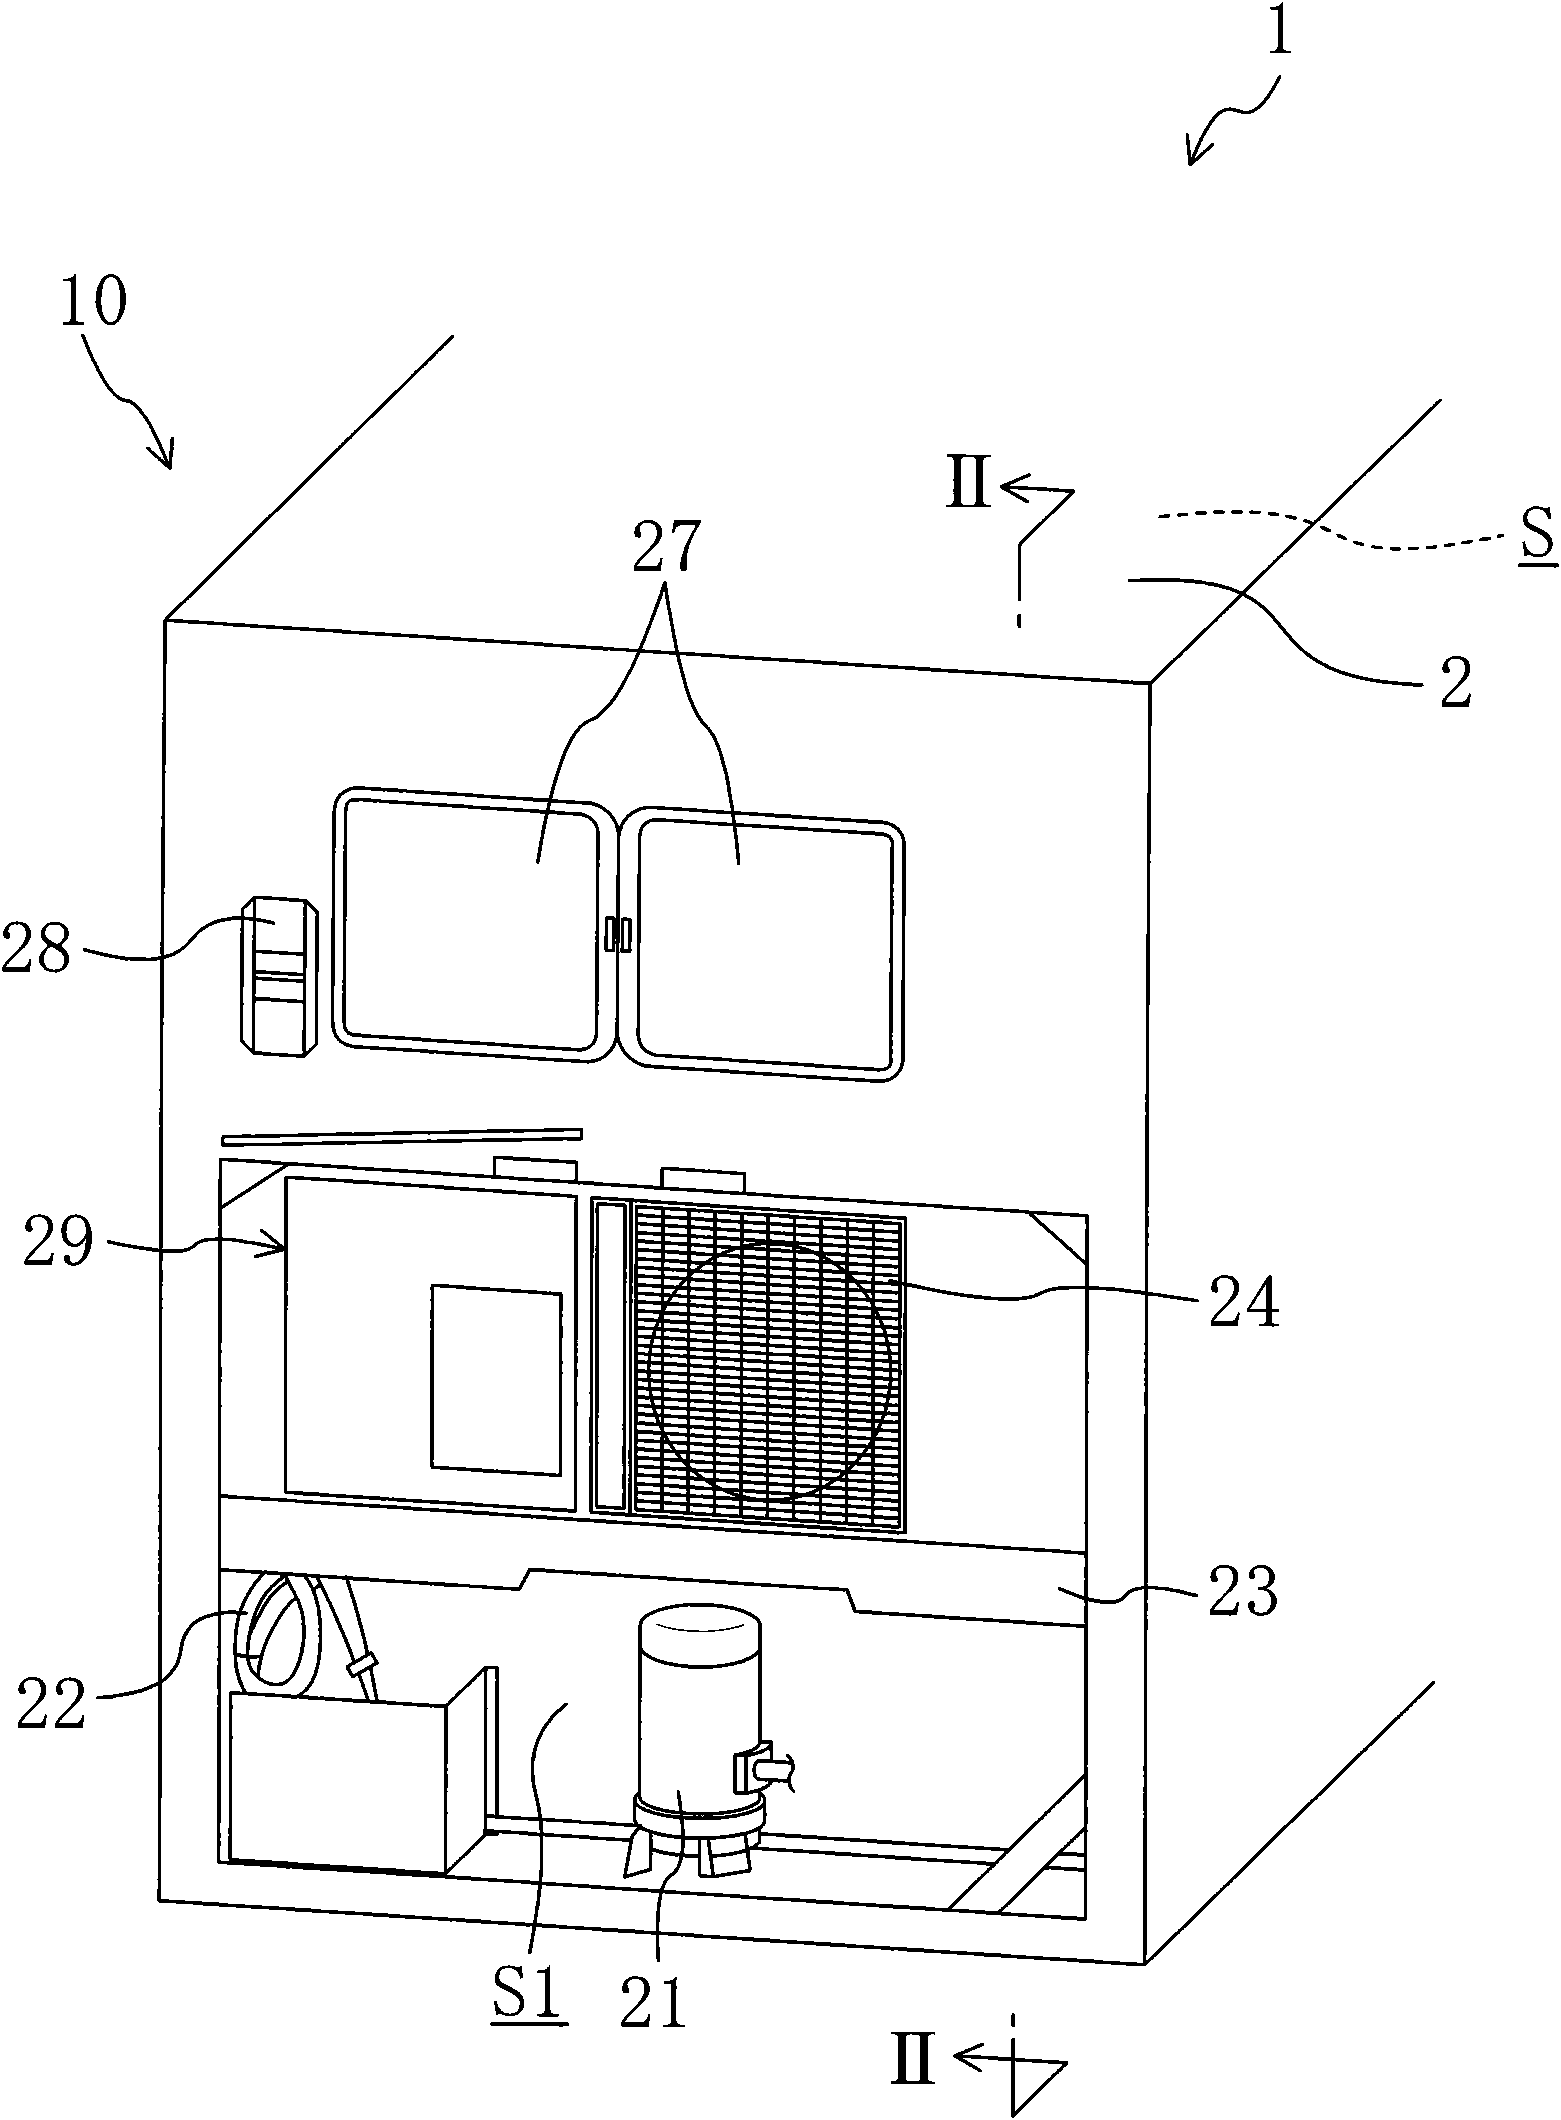 Casing structure of freezer for container and process for manufacturing the same